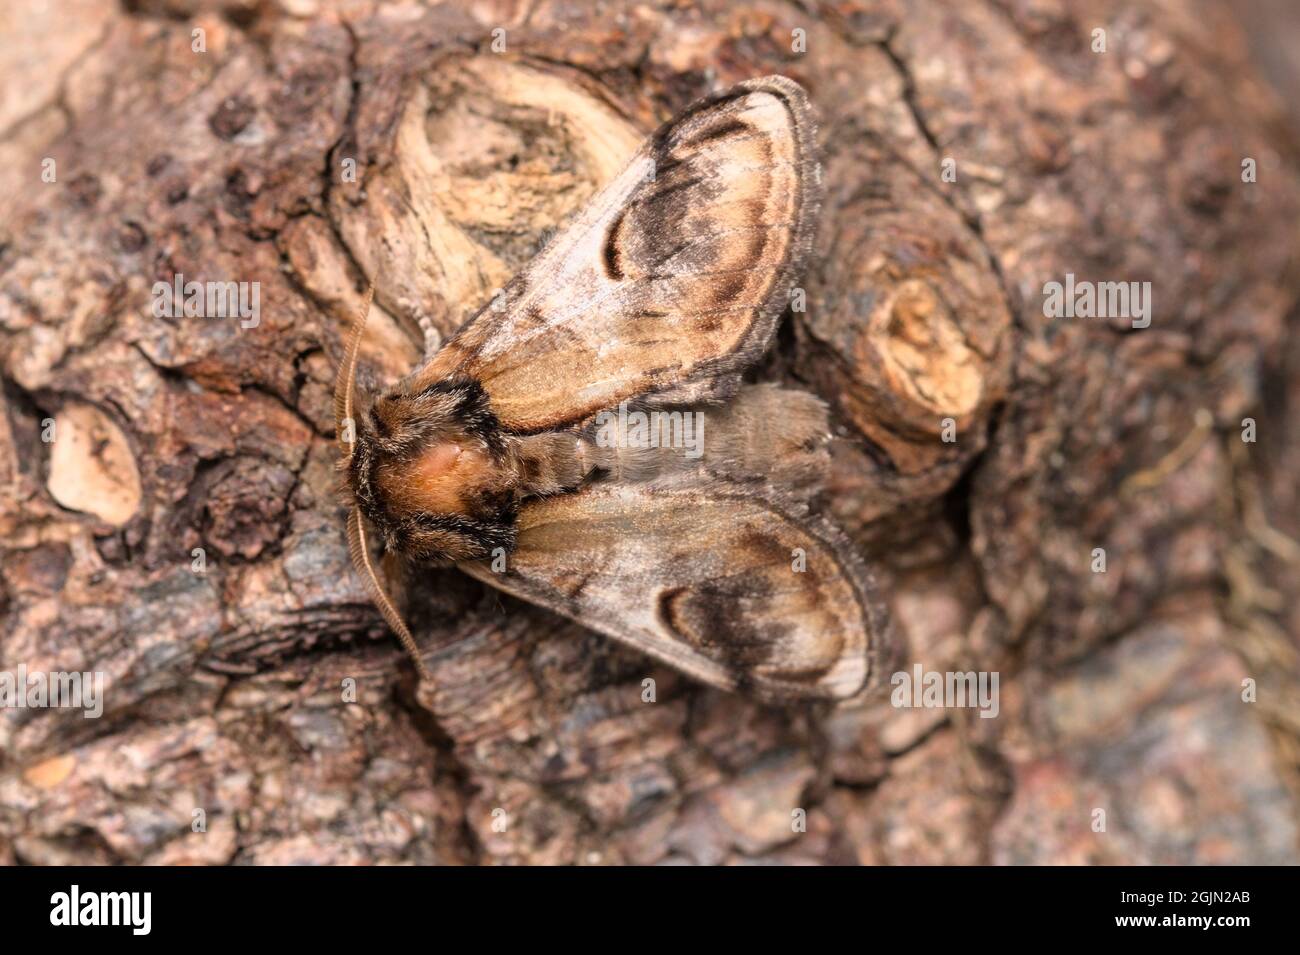 Pebble Prominent Moth, Notodonta ziczac, With Exceptional Camouflage Against the Bark Of A Tree, UK Stock Photo